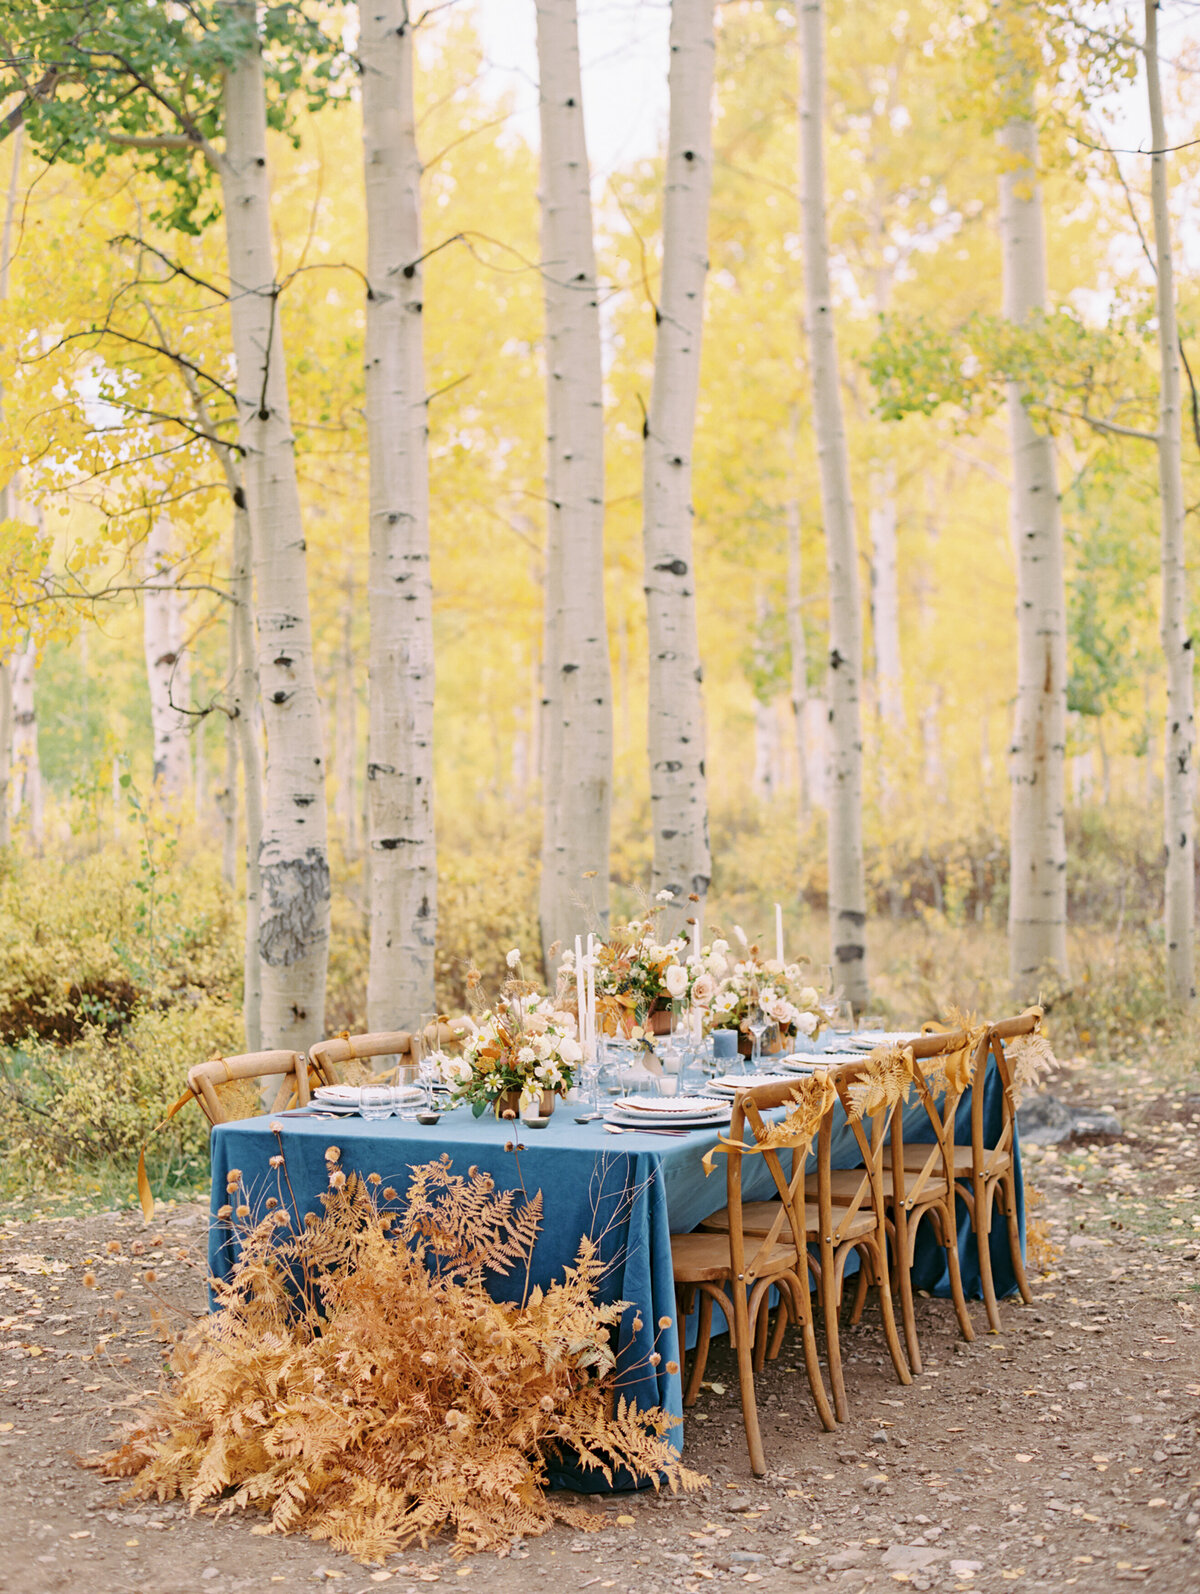 Wedding venue in nature photographed by Chicago editorial wedding photographer Arielle Peters